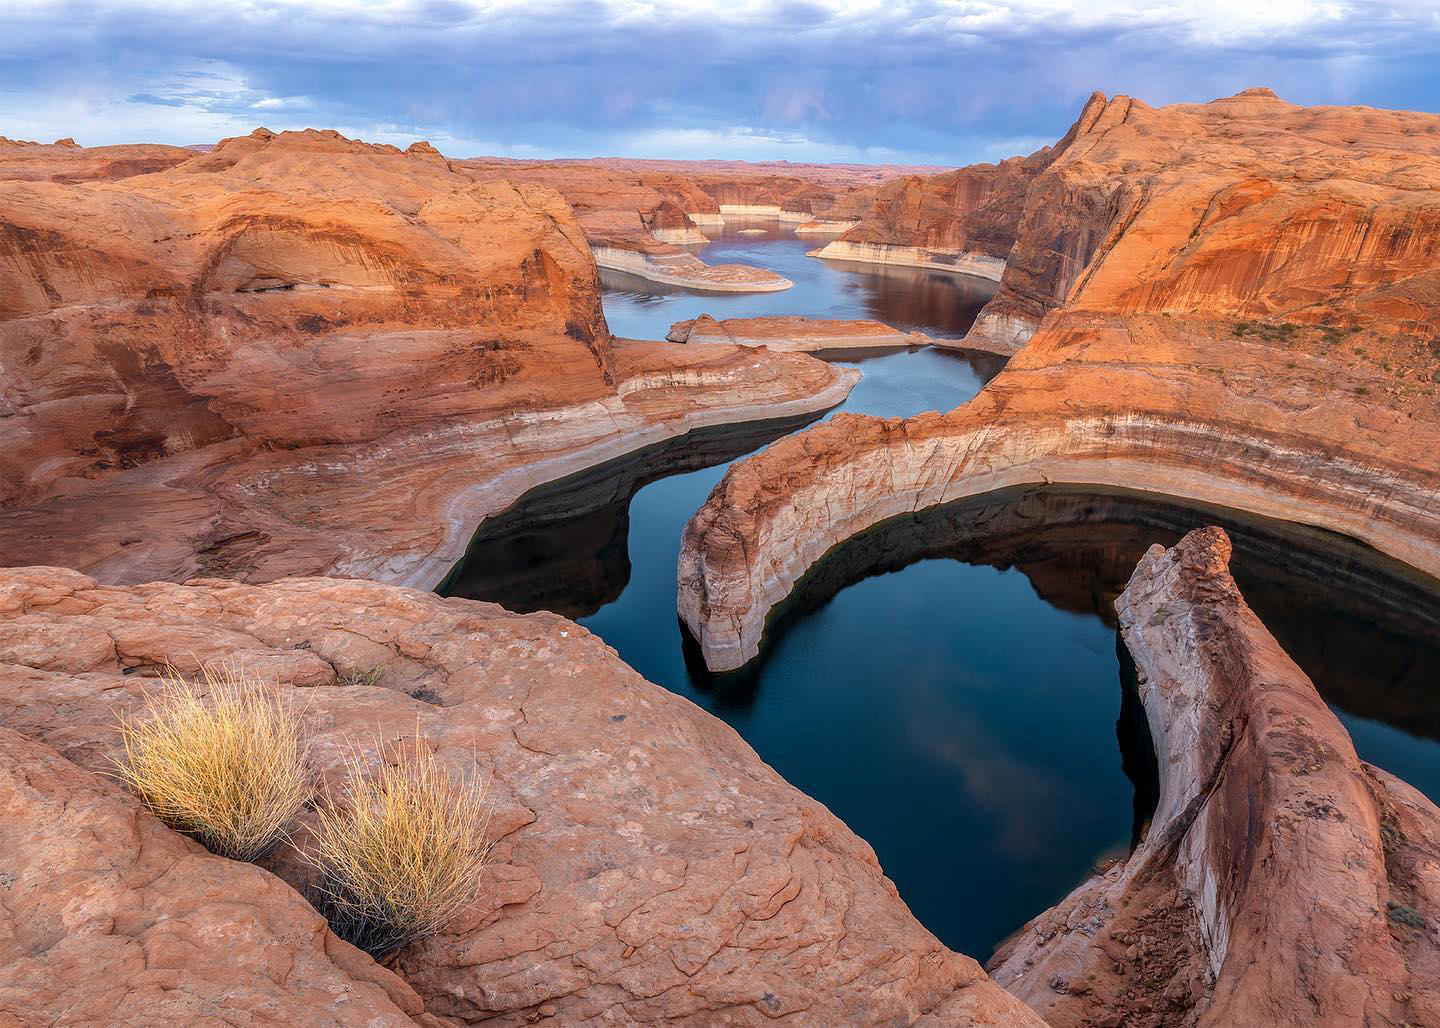 I wonder what this view looks like with the low water levels at Lake Powell